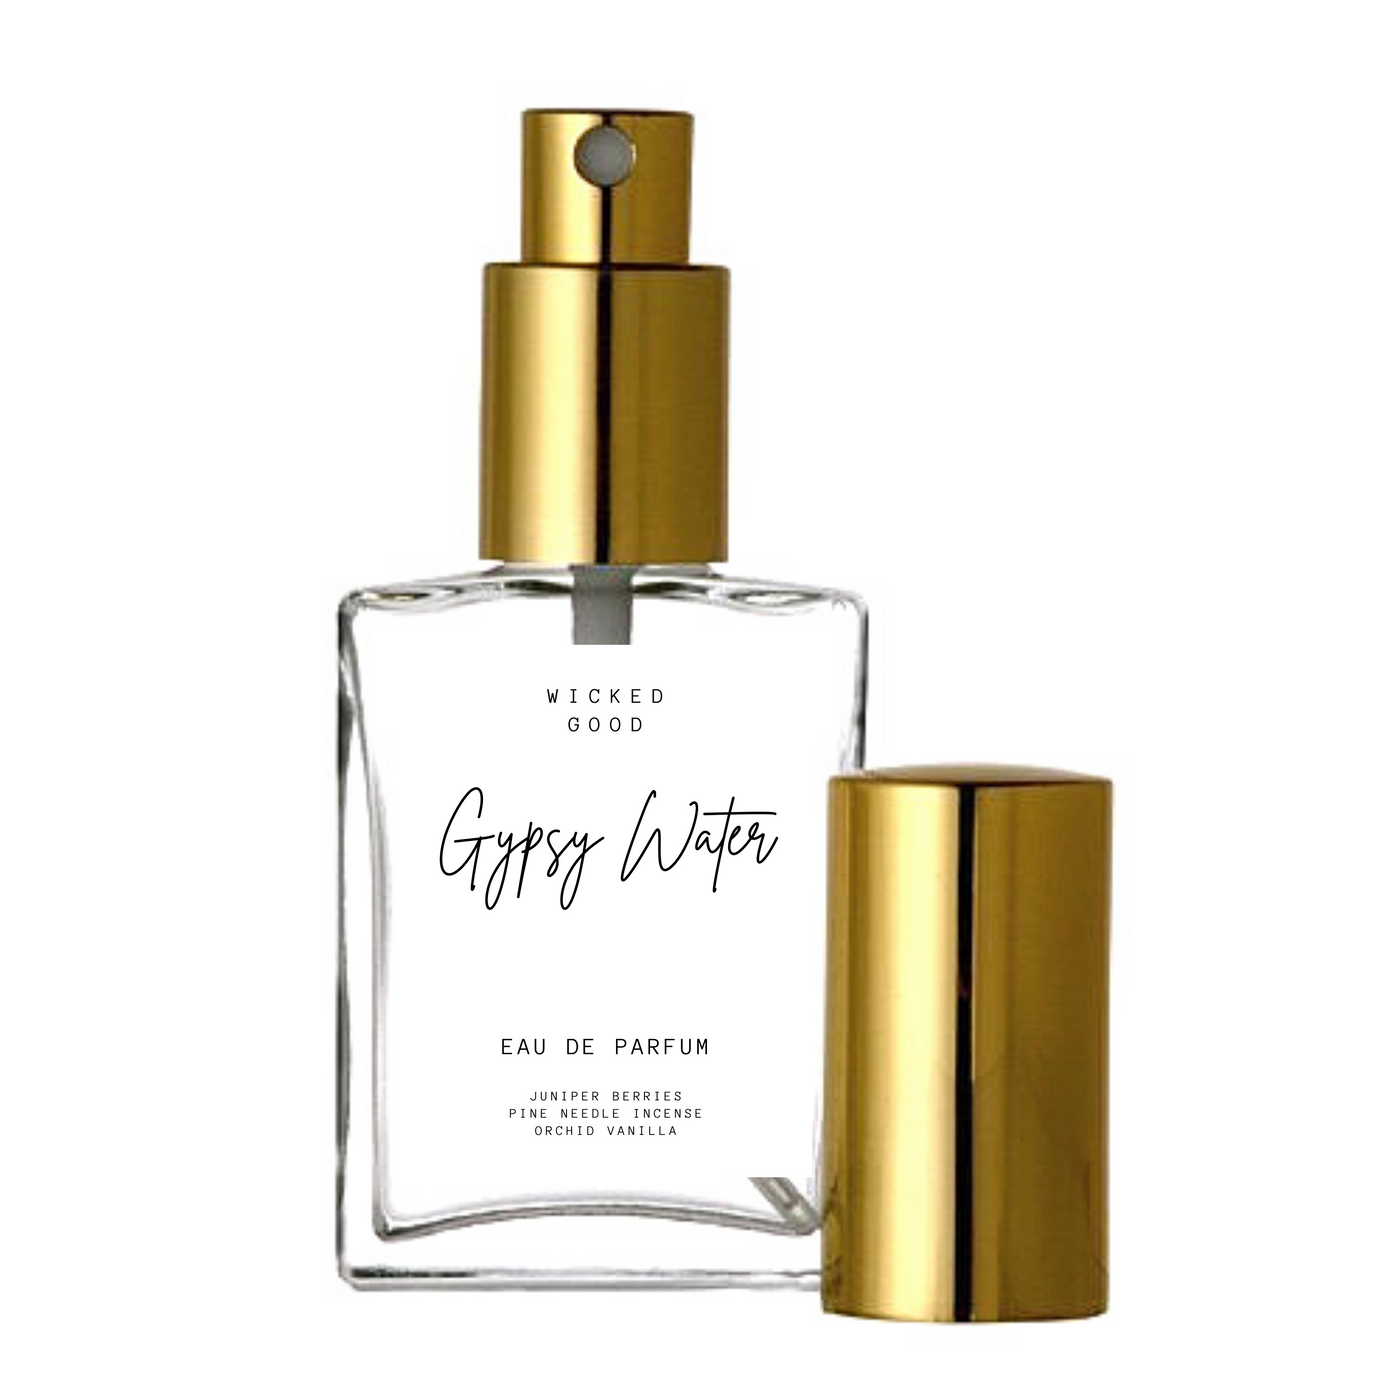 Byredo Gypsy Water dupe for $14.90?🤯🔍